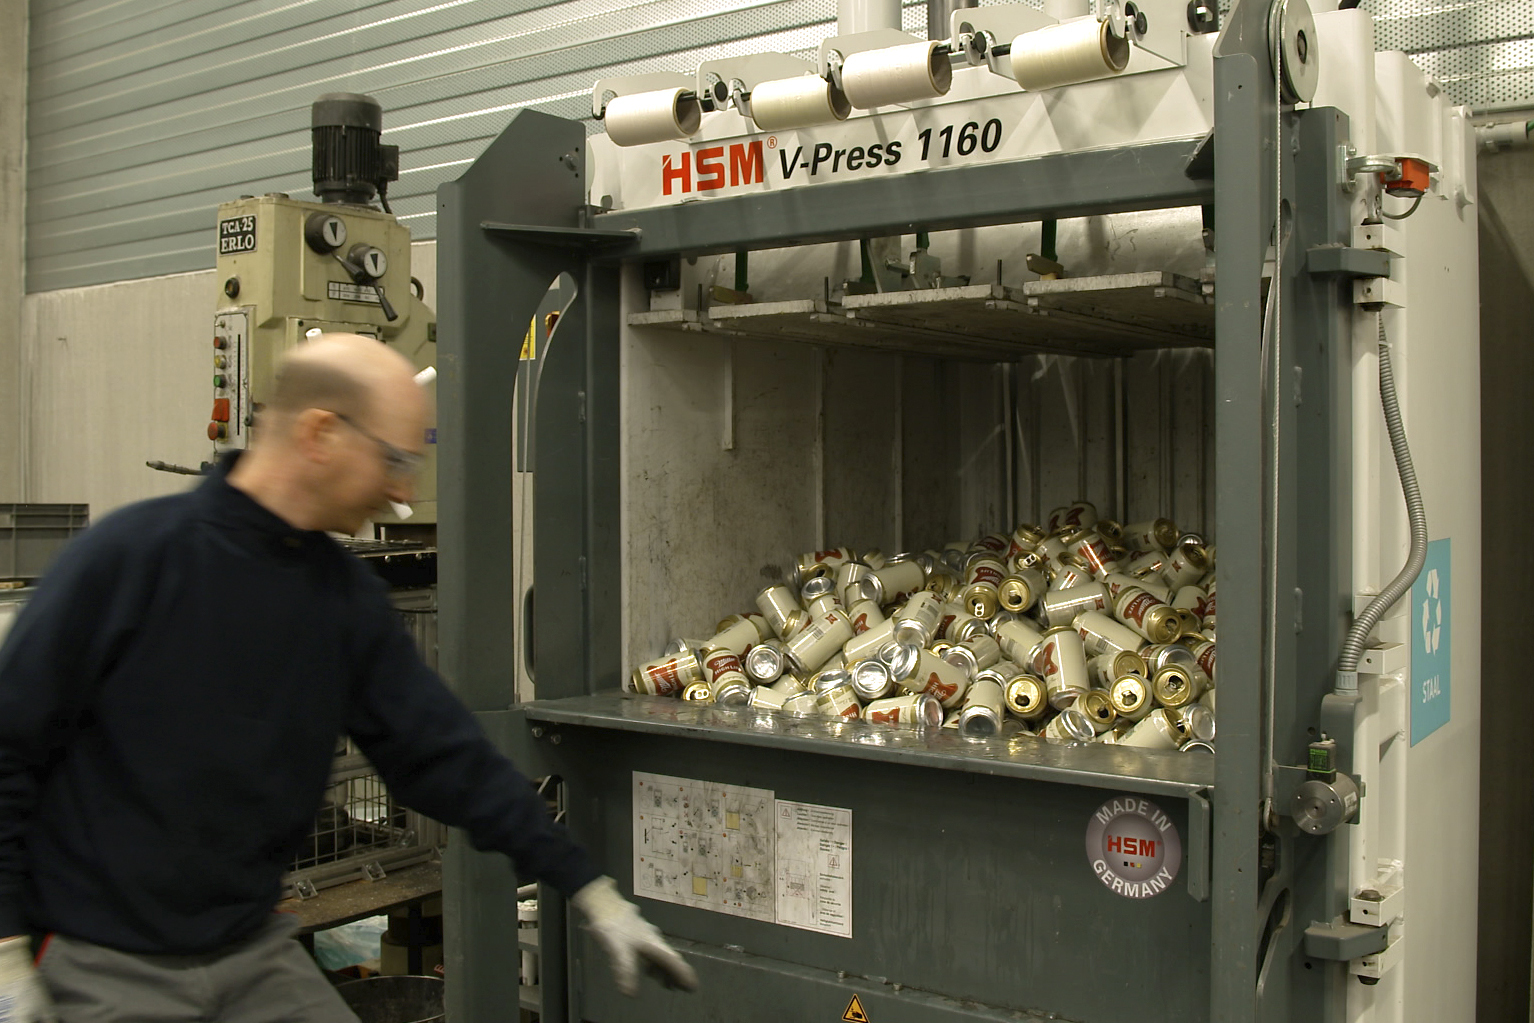 In this image provided by Comite Champagne, a worker prepares to press the button of a machine to crush empty Miller High Life beer cans at the Westlandia plant in Ypres, Belgium, Monday, April 17, 2023. Belgian customs have destroyed more than 2,000 cans of Miller High Life advertised as the ″Champagne of beers” at the request of houses and growers of the bubbly beverage. (Comite Champagne via AP)